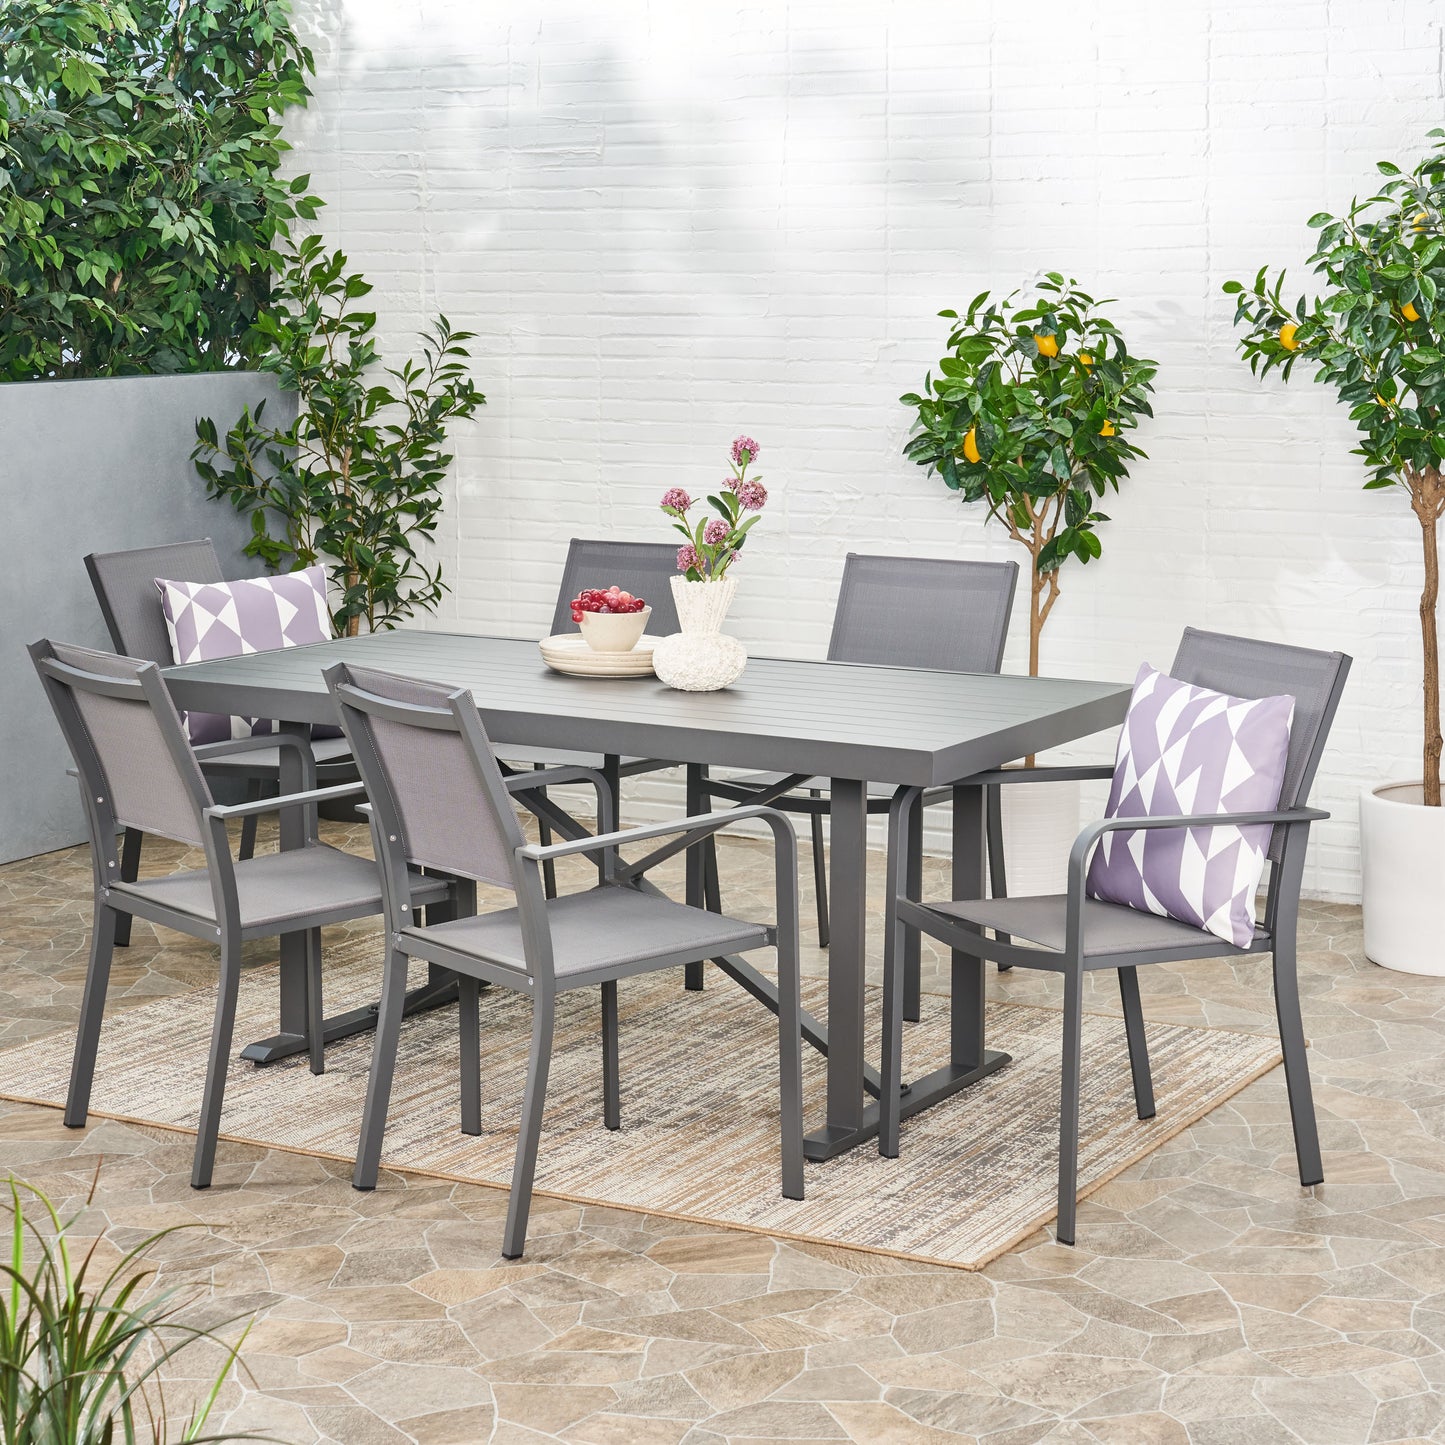 Atkinson Outdoor Modern Industrial Aluminum 7 Piece Dining Set with Mesh Seating